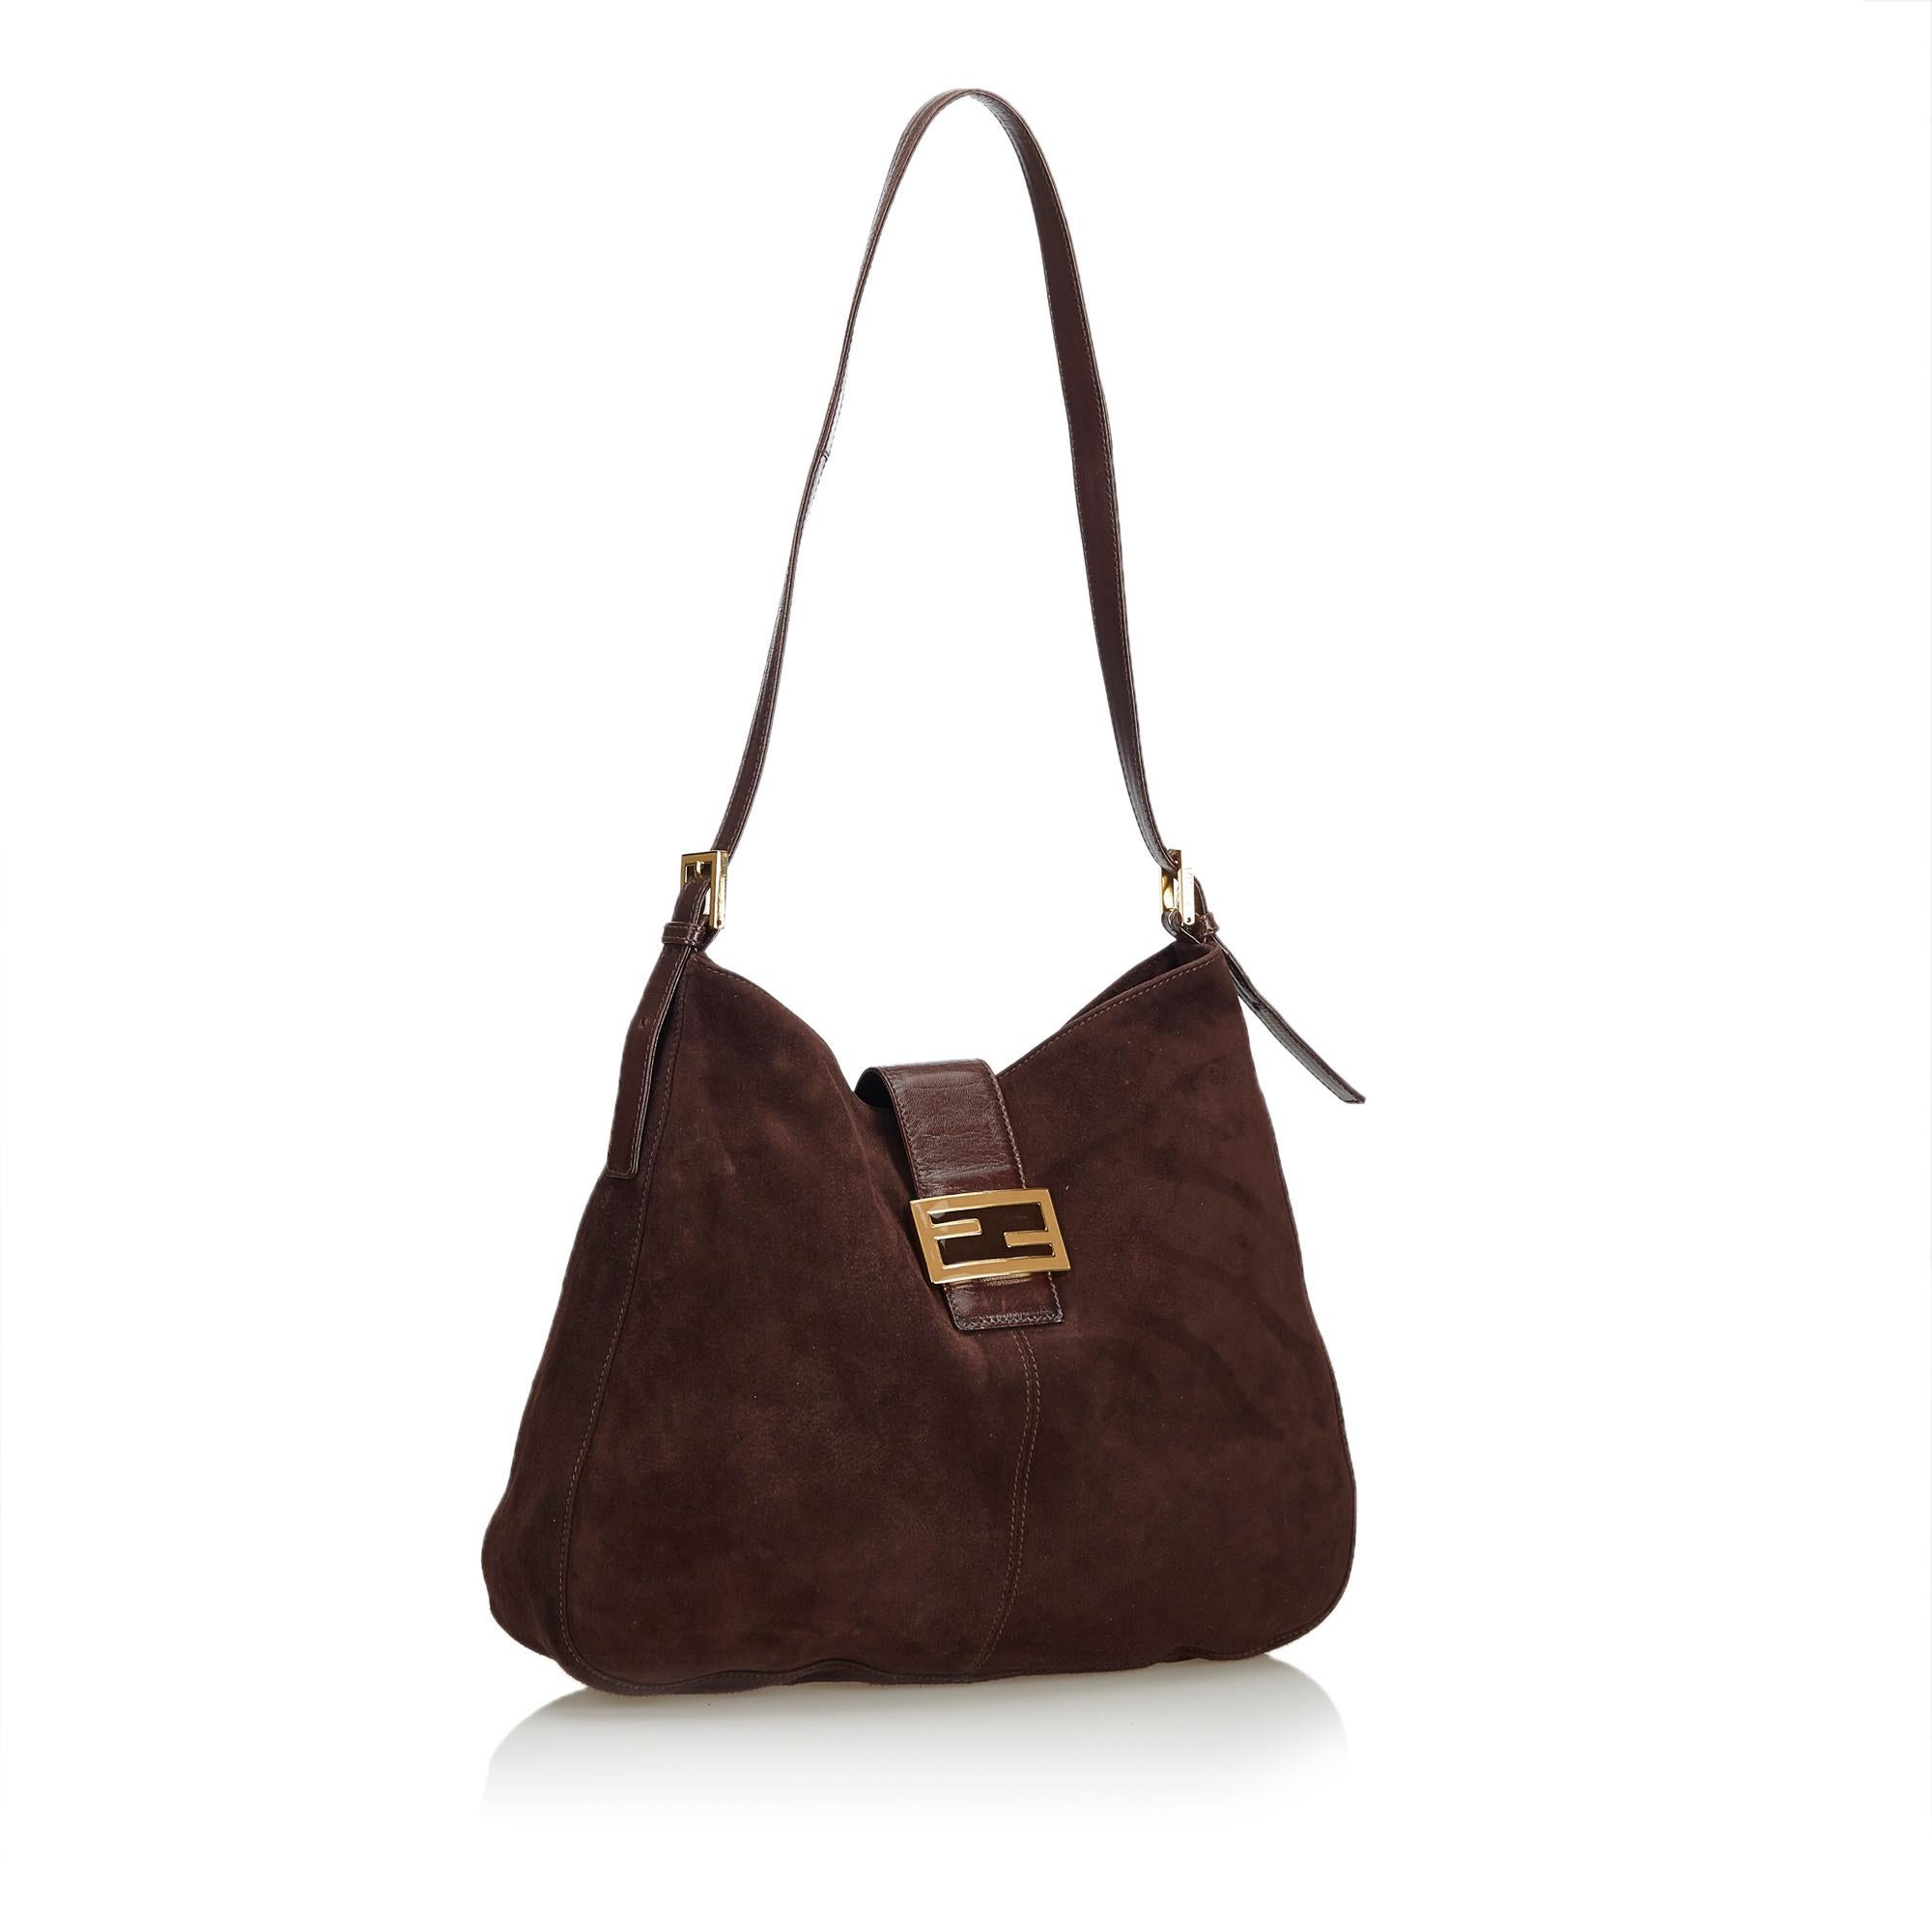 This shoulder bag features a suede body, flat leather strap, fold over top with flat leather strap and magnetic closure, and an interior zip pocket. It carries as B+ condition rating.

Inclusions: 
This item does not come with